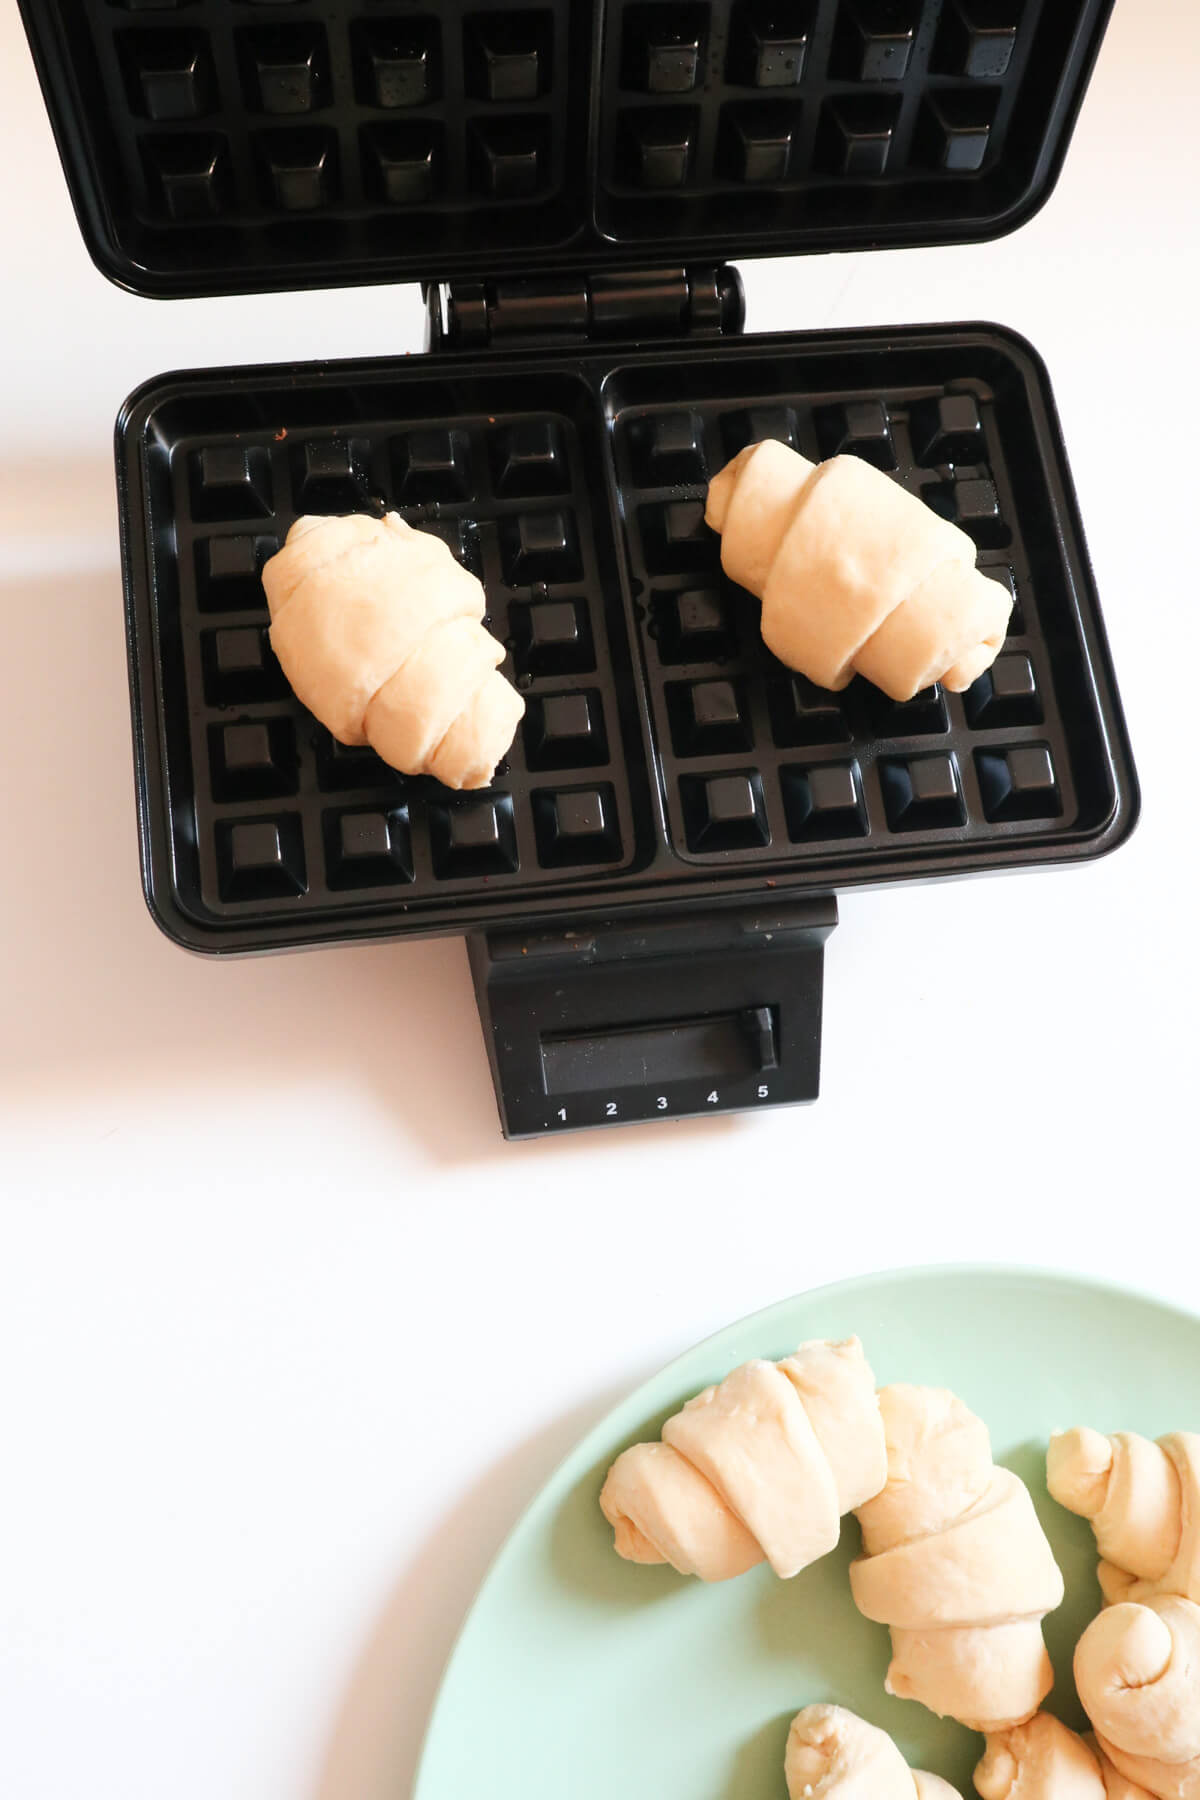 Placing little croissants into a waffle iron.